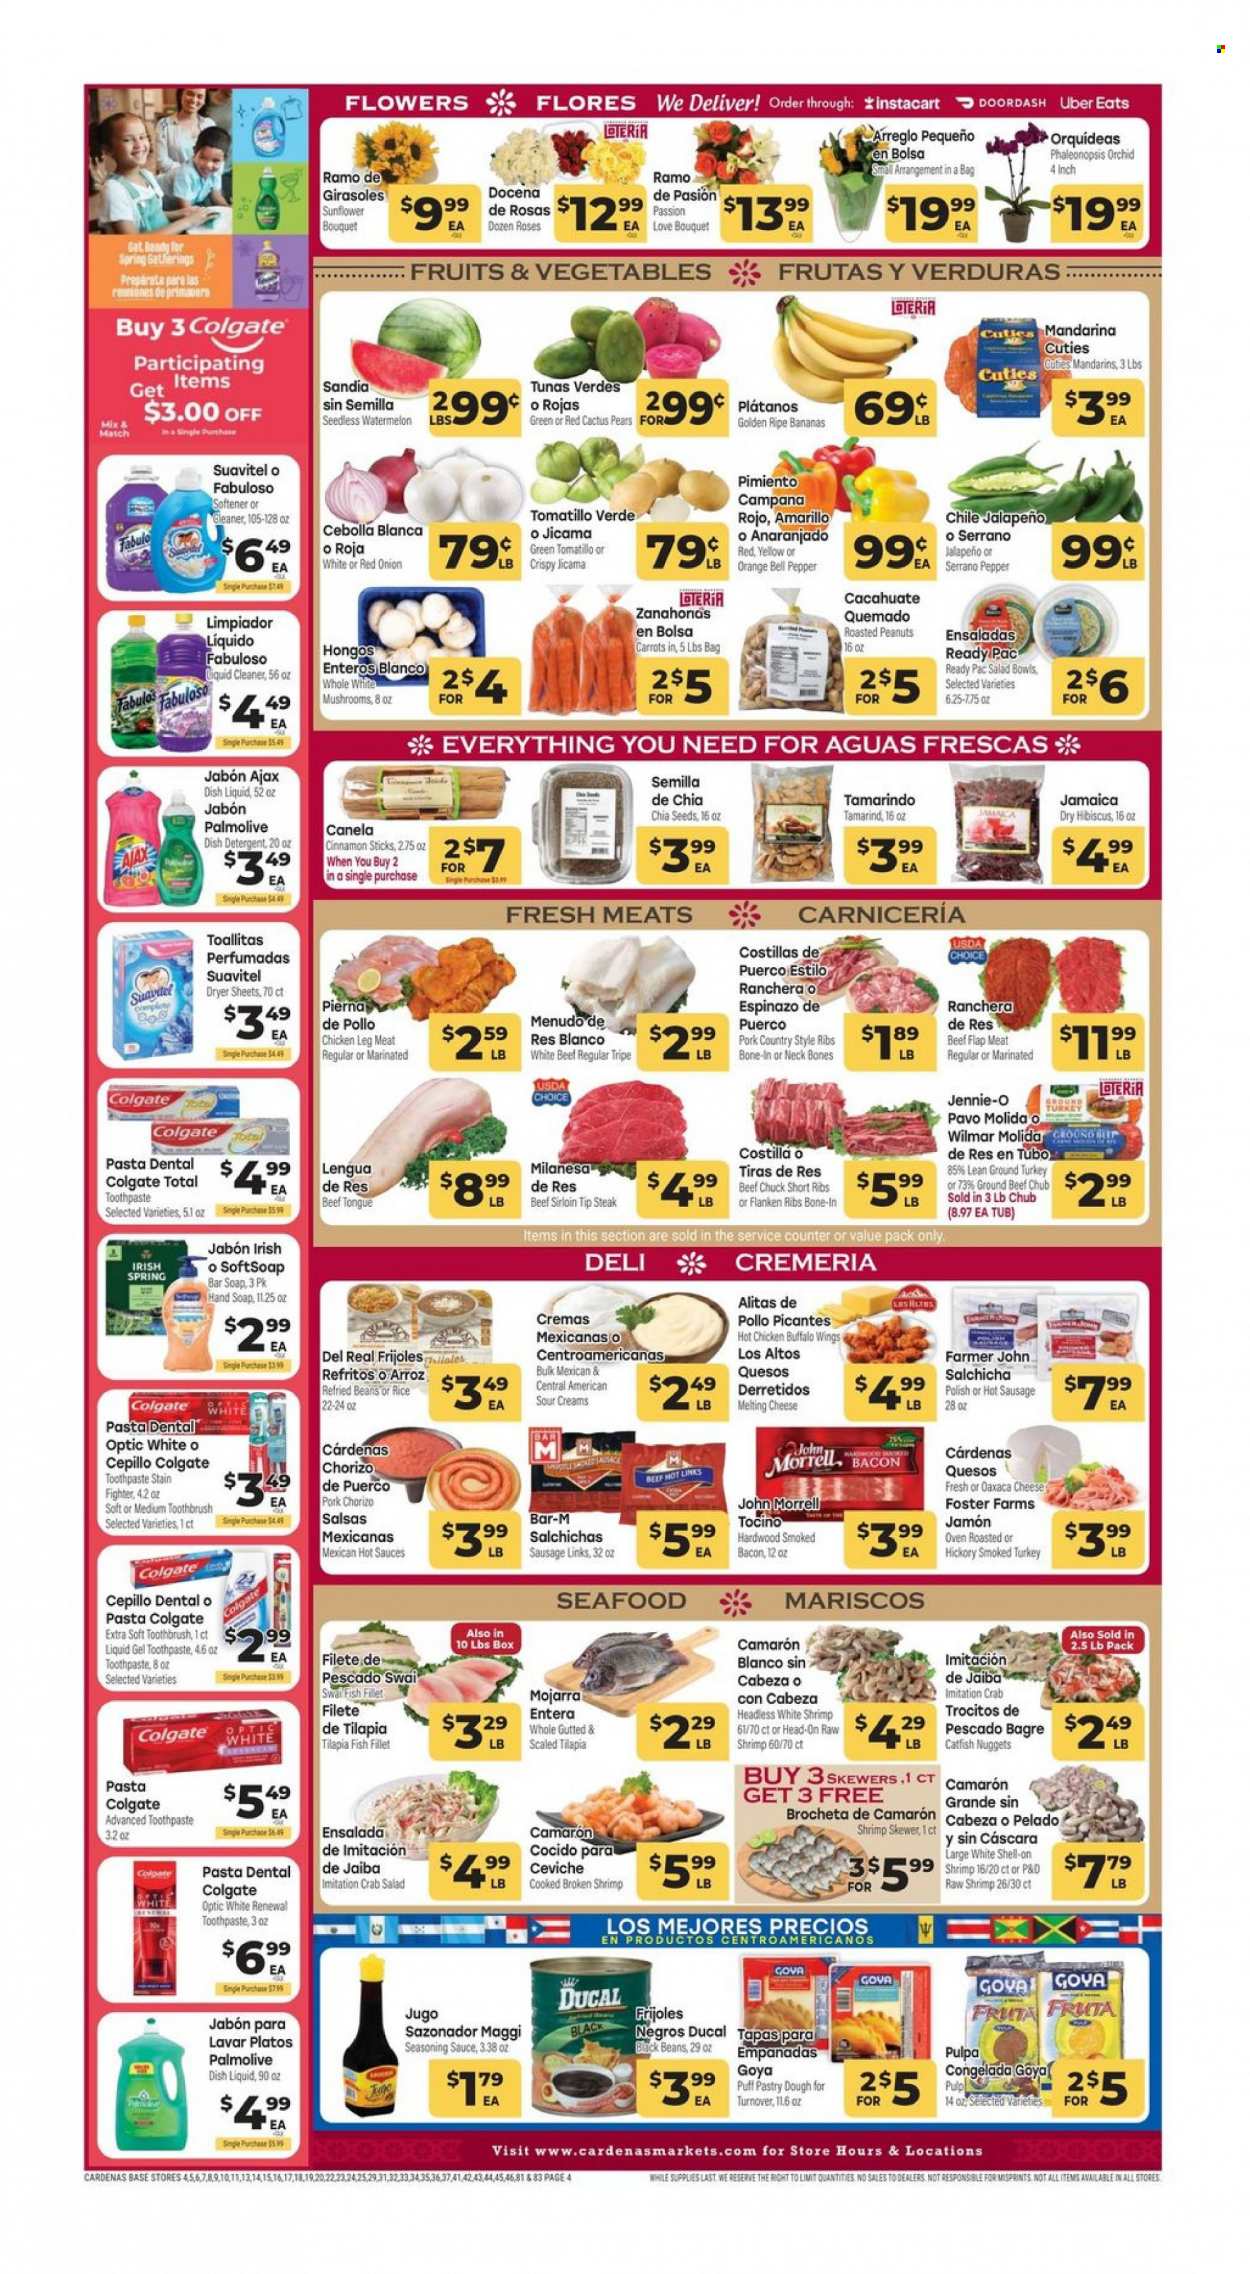 thumbnail - Cardenas Flyer - 05/24/2023 - 05/30/2023 - Sales products - mushrooms, beans, bell peppers, carrots, tomatillo, jalapeño, bananas, mandarines, watermelon, pears, oranges, catfish, fish fillets, tilapia, seafood, fish, shrimps, crab sticks, pasta, Ready Pac, empanadas, bacon, chorizo, tapas, sausage, smoked sausage, crab salad, cheese, sour cream, puff pastry, Maggi, tamarind, black beans, refried beans, Goya, chia seeds, spice, cinnamon, roasted peanuts, peanuts, ground turkey, chicken legs, chicken, turkey, beef meat, beef ribs, beef sirloin, ground beef, steak, ribs, pork ribs, country style ribs, detergent, cleaner, liquid cleaner, Ajax, Fabuloso, fabric softener, dryer sheets, Suavitel, dishwashing liquid, dishwasher cleaner, Softsoap, hand soap, Palmolive, soap bar, soap, Colgate, toothbrush, toothpaste, polish, salad bowl, cactus, sunflower, bouquet, rose, flowers, jicama. Page 4.